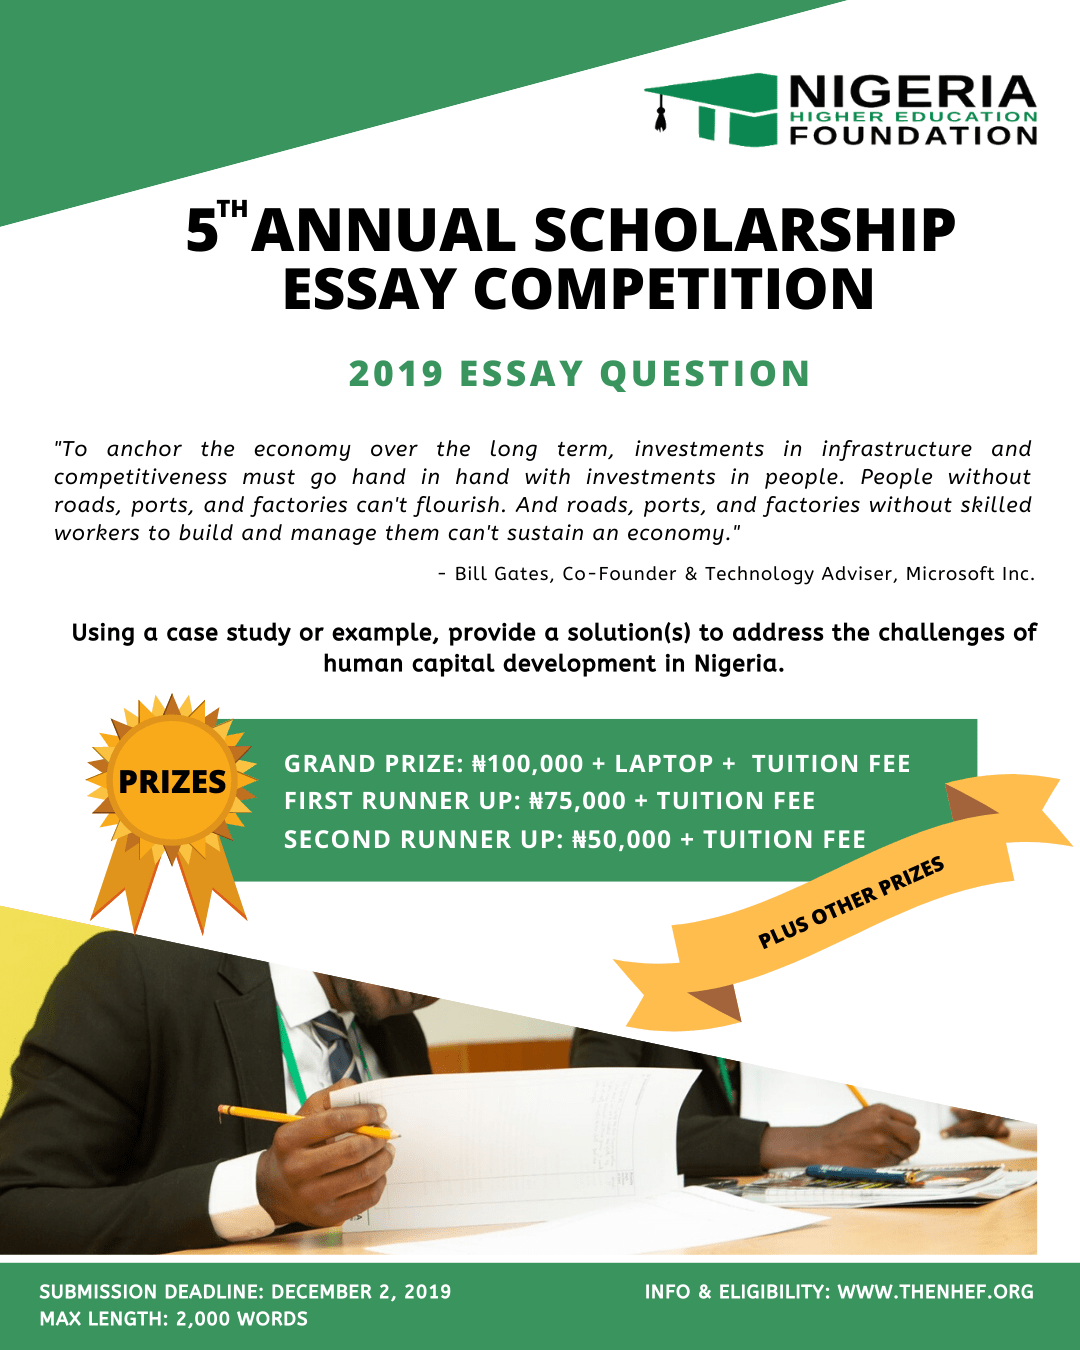 the organisation of an essay competition